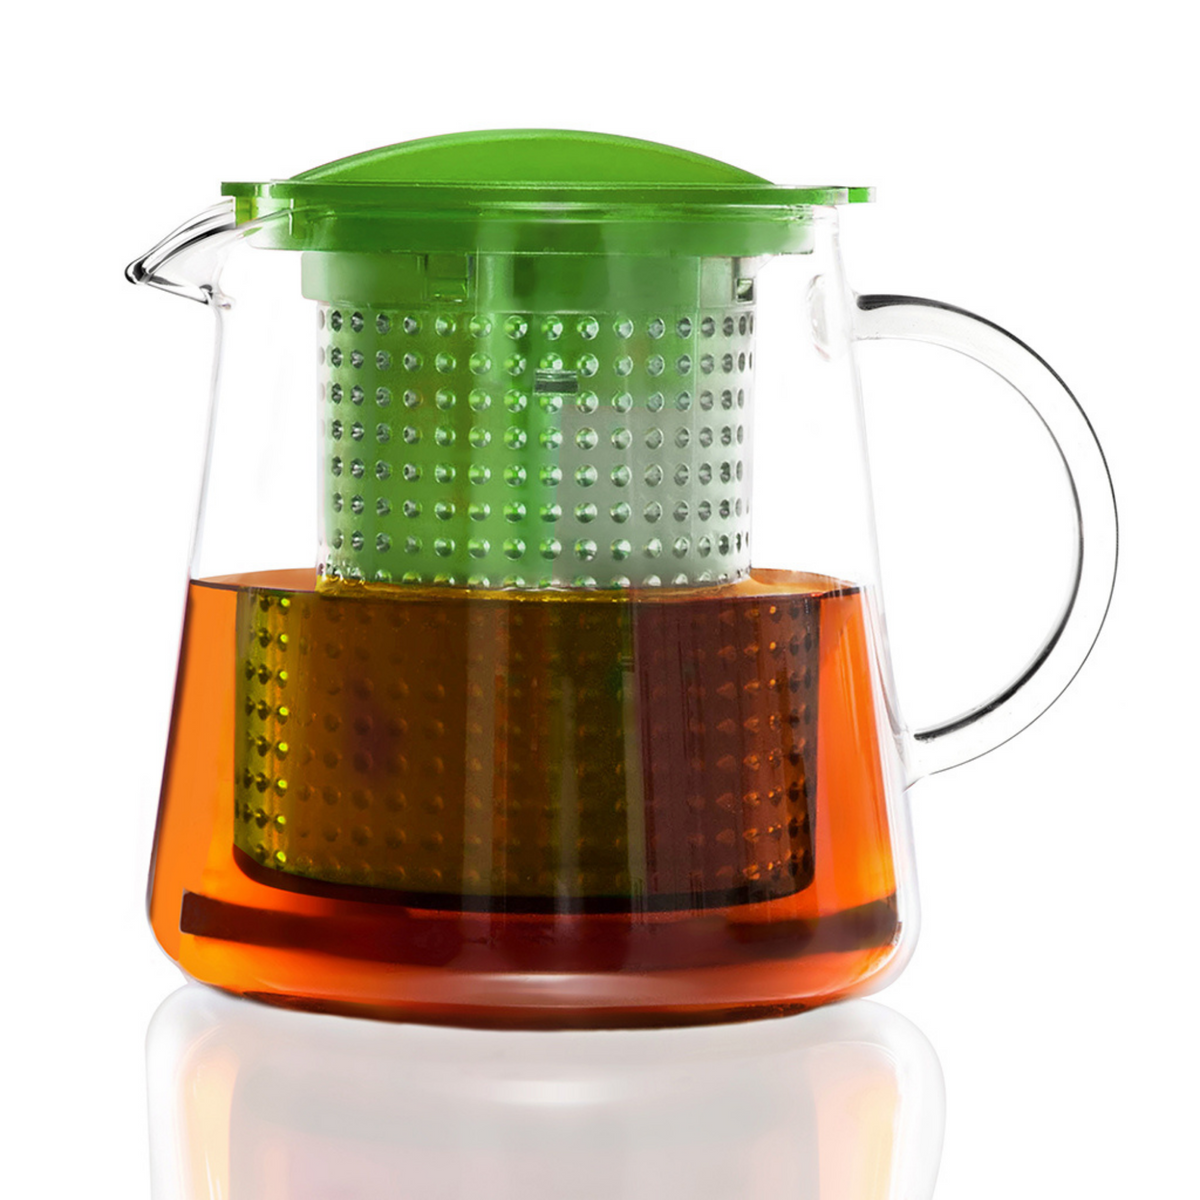 Primary Image of Tea Control 0.8 Liter Teapot with Brew Control